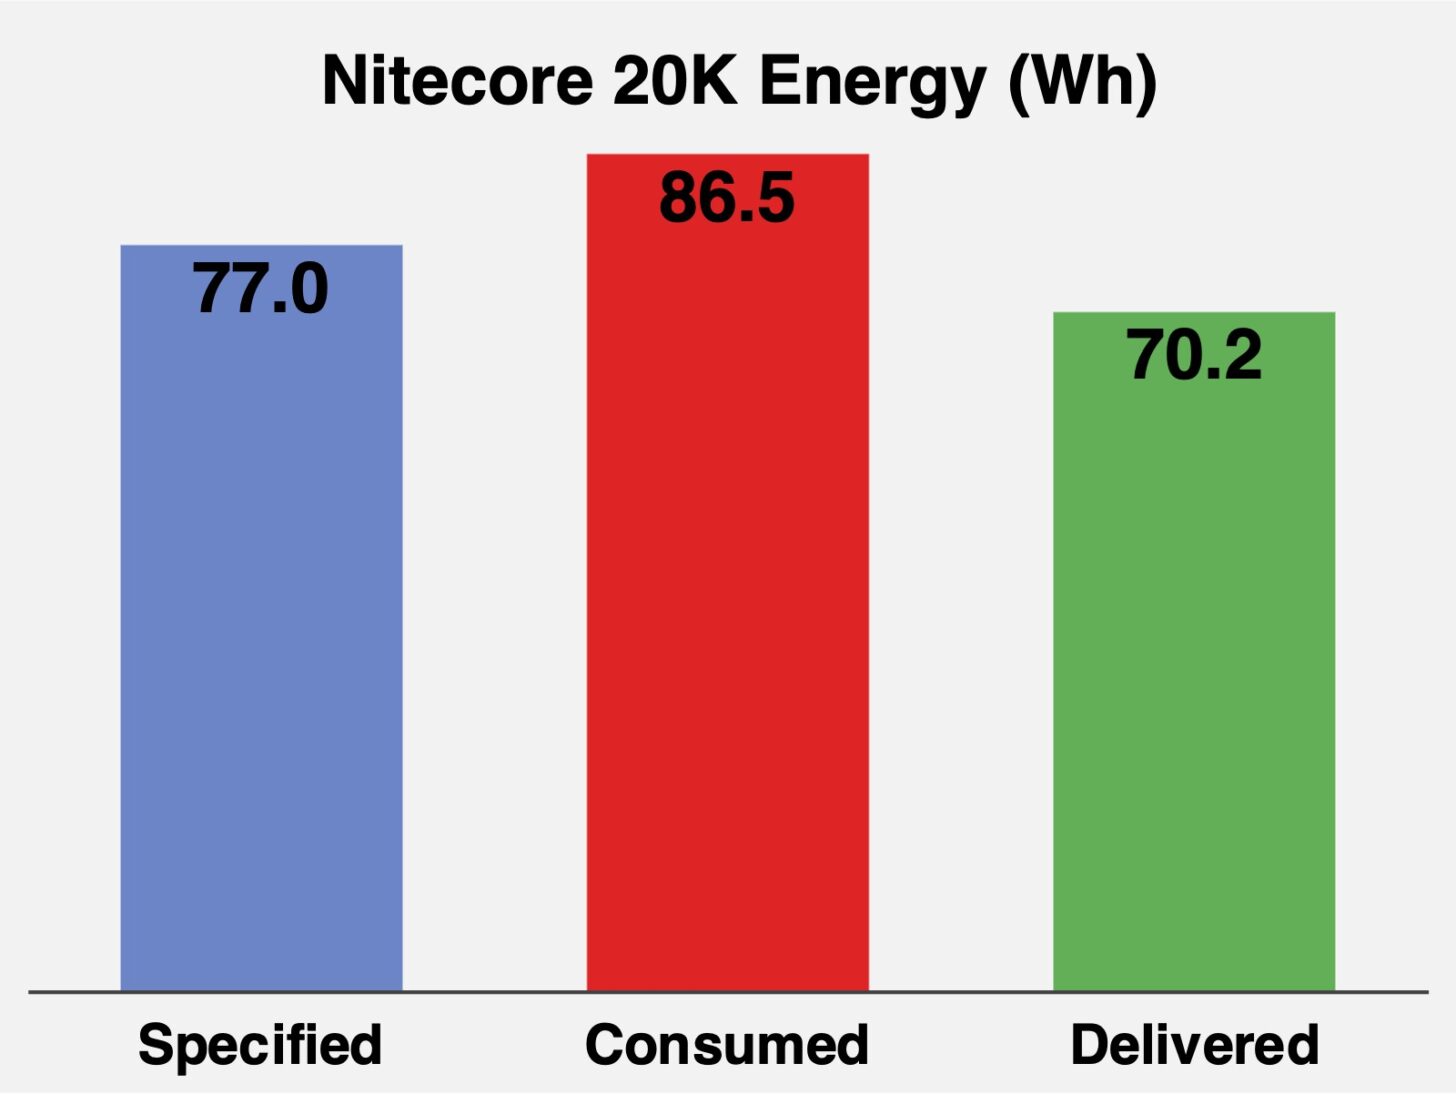 Chart comparing Nitecore 20K specified, consumed, and delivered energy, in watt-hours.